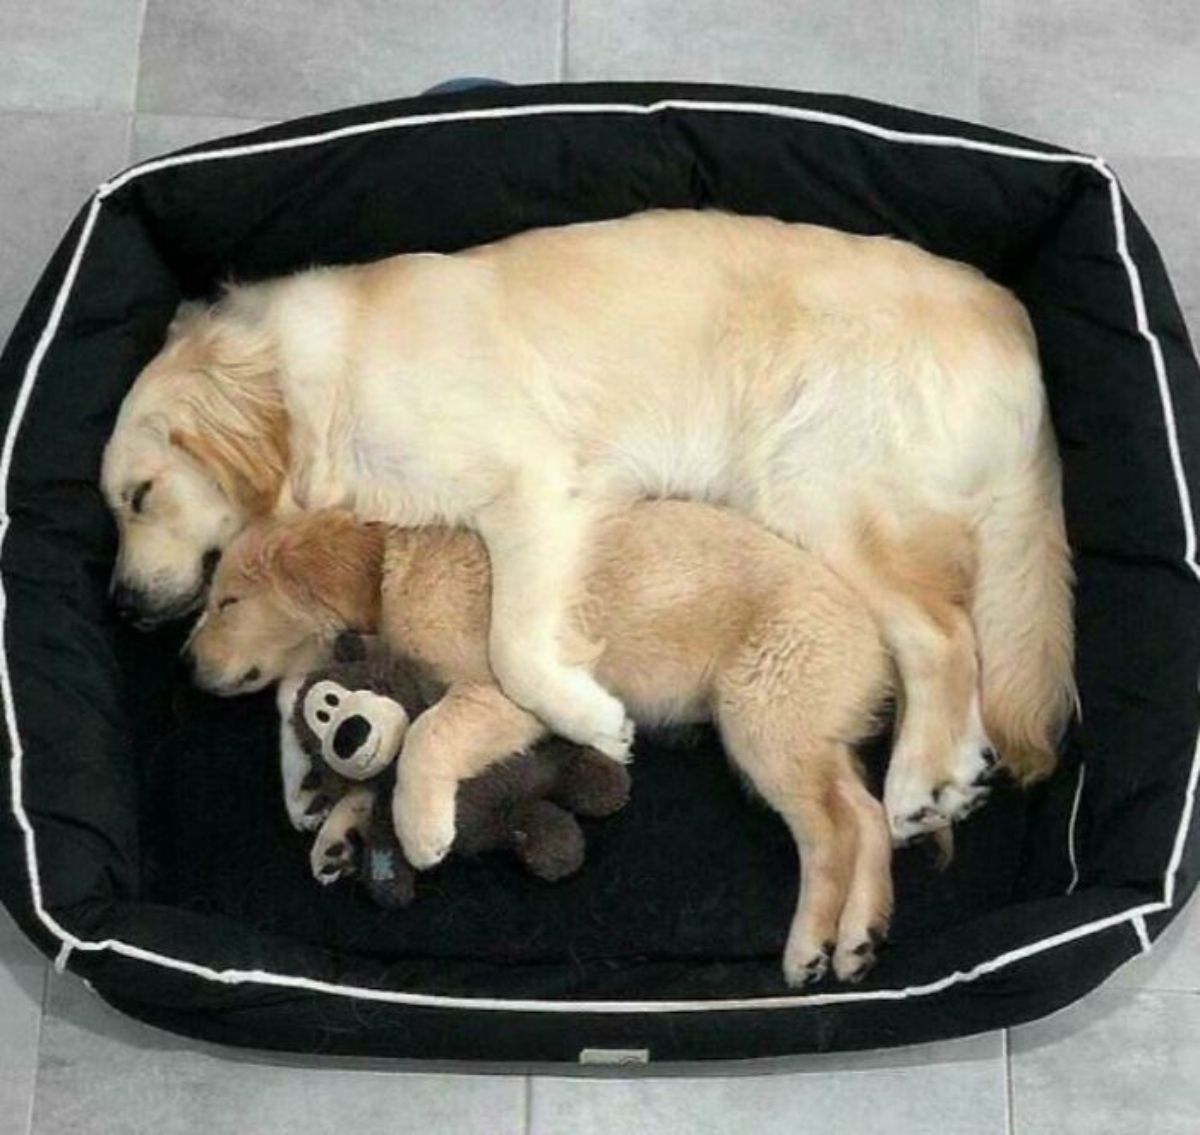 adult golden retriever cuddling a younger golden retriever who is cuddling a black and light brown monkey stuffed toy all sleeping on a black and white dog bed